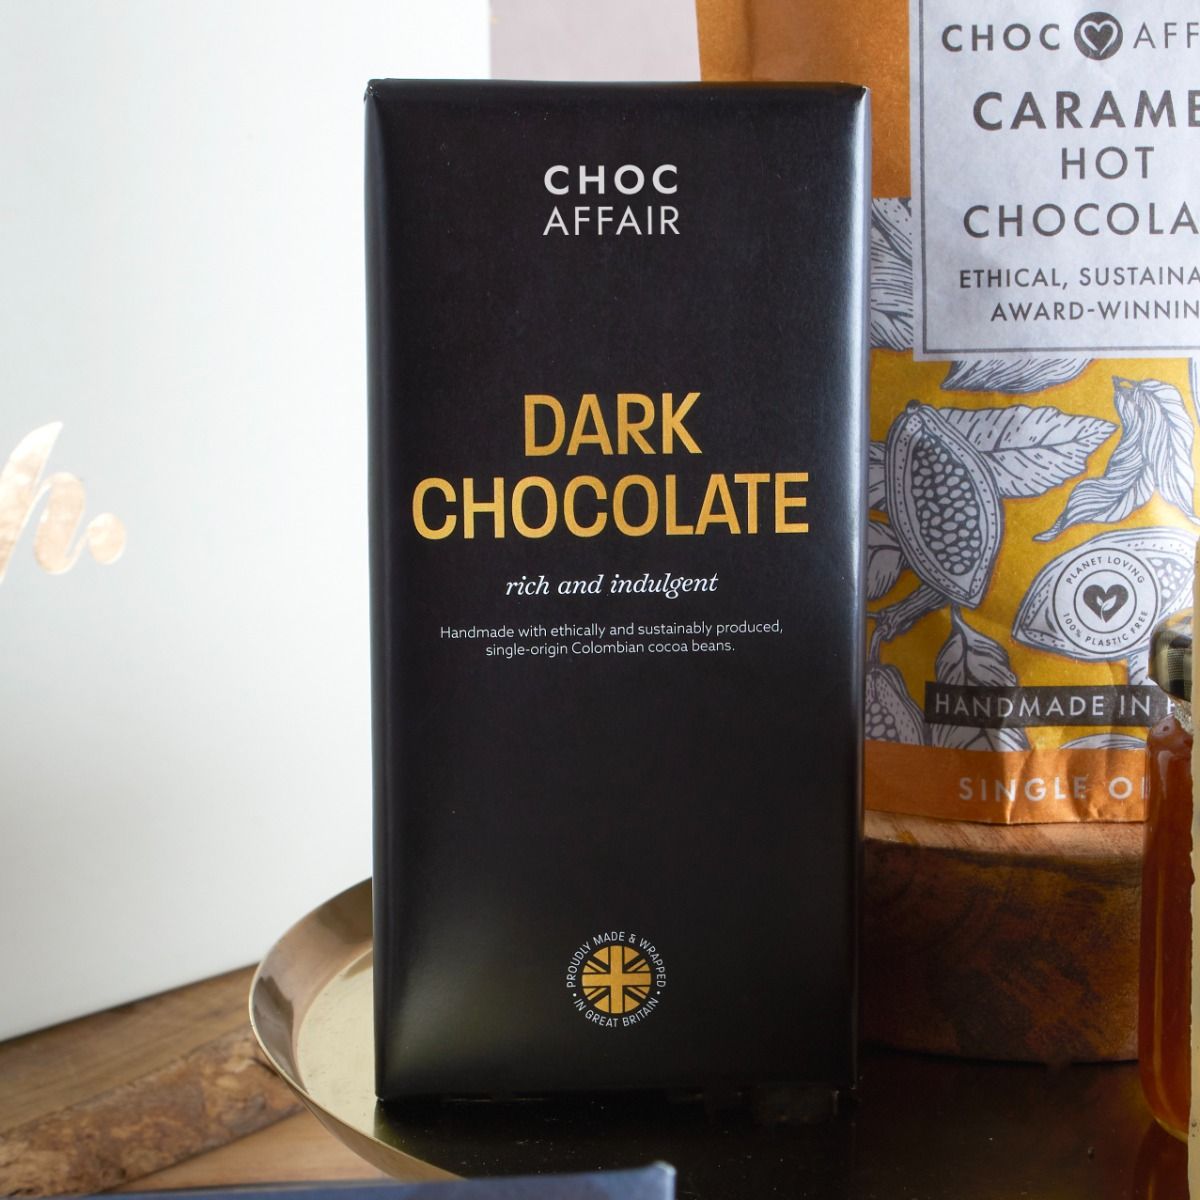 Close up of Choc Affair dark chocolate bar and also caramel hot chocolate pouch